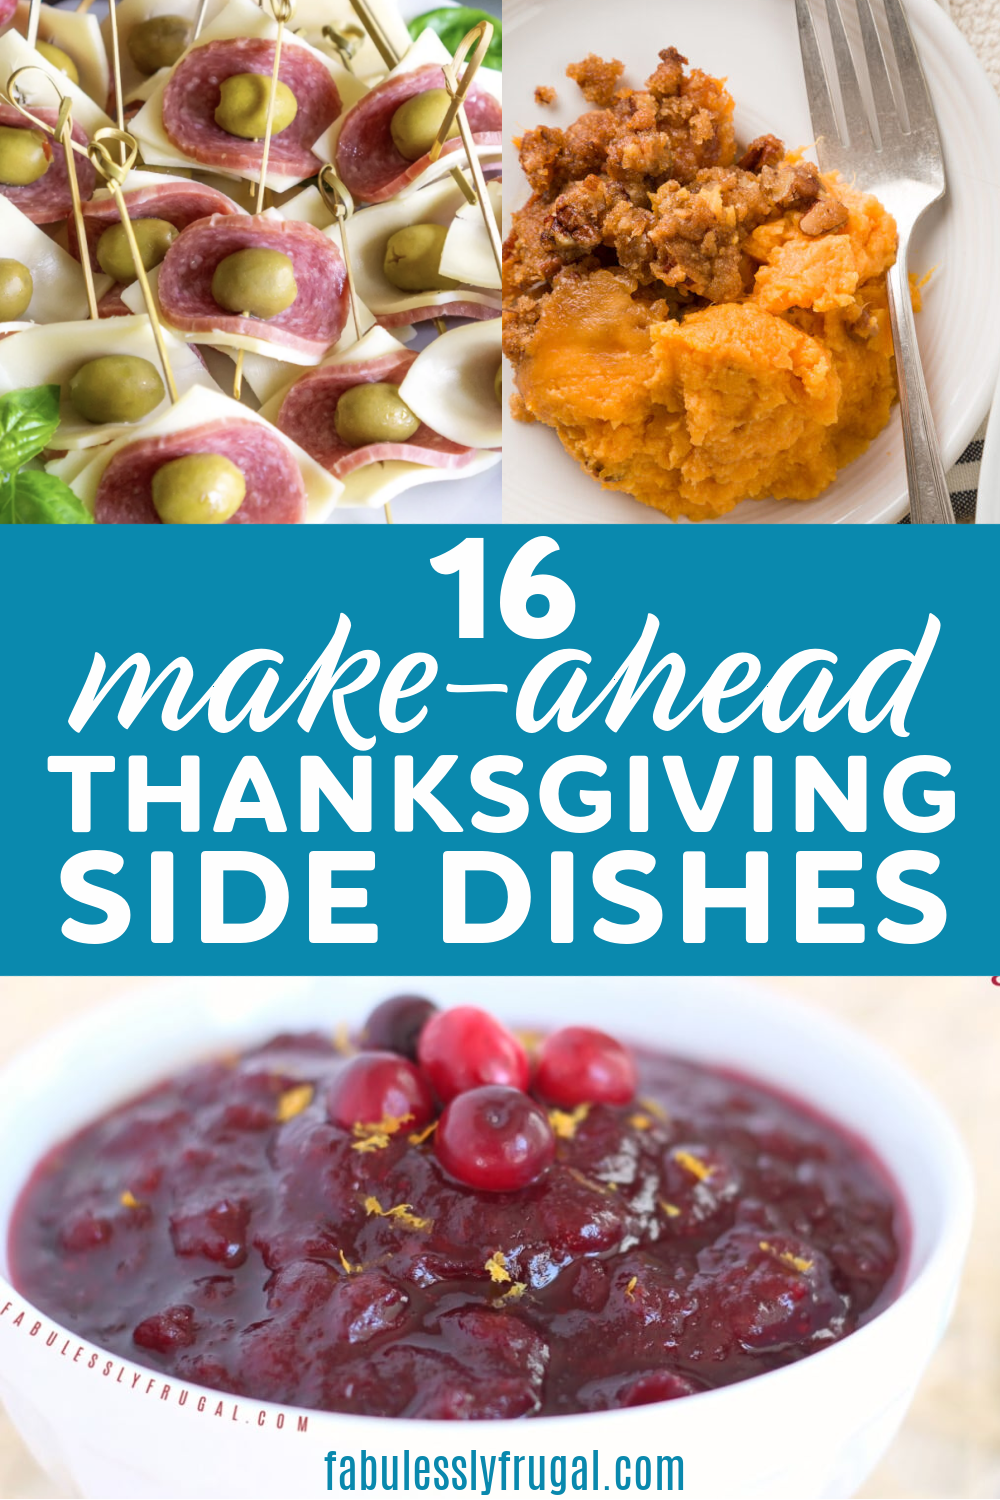 30 Easy Make-Ahead Thanksgiving Recipes That Will Save You Time ...